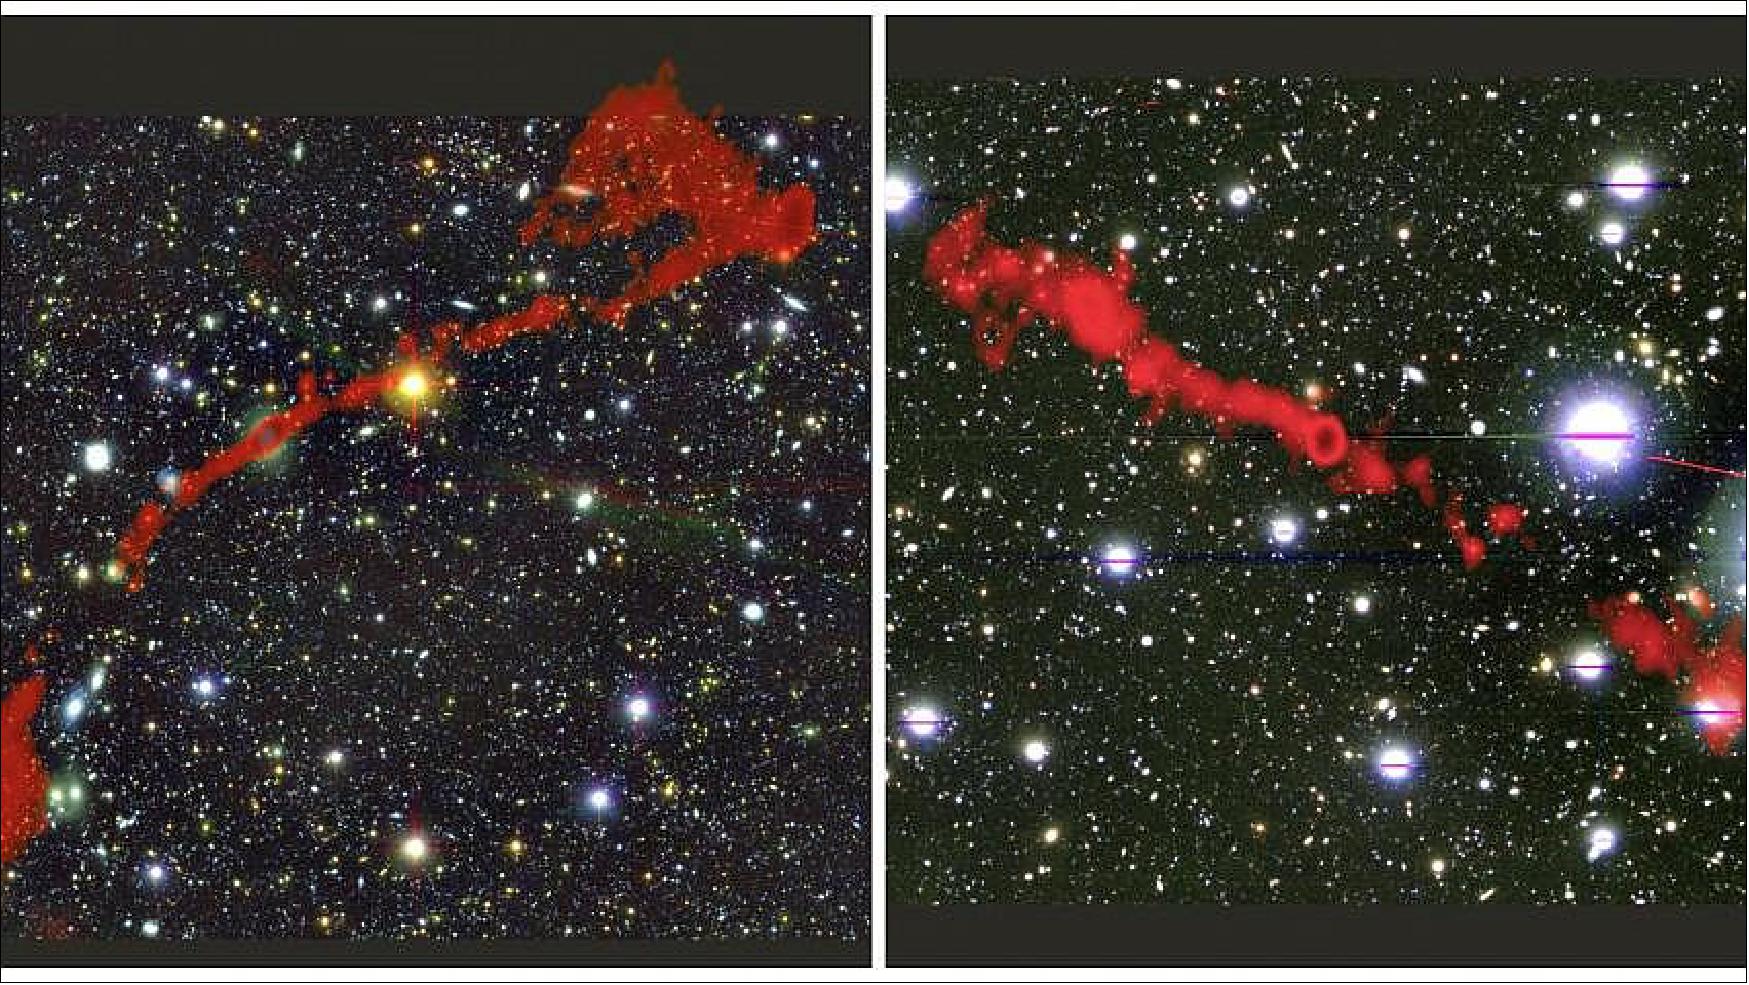 Figure 69: Two giant radio galaxies found with the MeerKAT telescope. In the background is the sky as seen in optical light. Overlaid in red is the radio light from the enormous radio galaxies, as seen by MeerKAT. Left: MGTC J095959.63+024608.6. Right: MGTC J100016.84+015133.0 [image credit: I. Heywood (Oxford/Rhodes/SARAO), attribution (CC BY 4.0)]